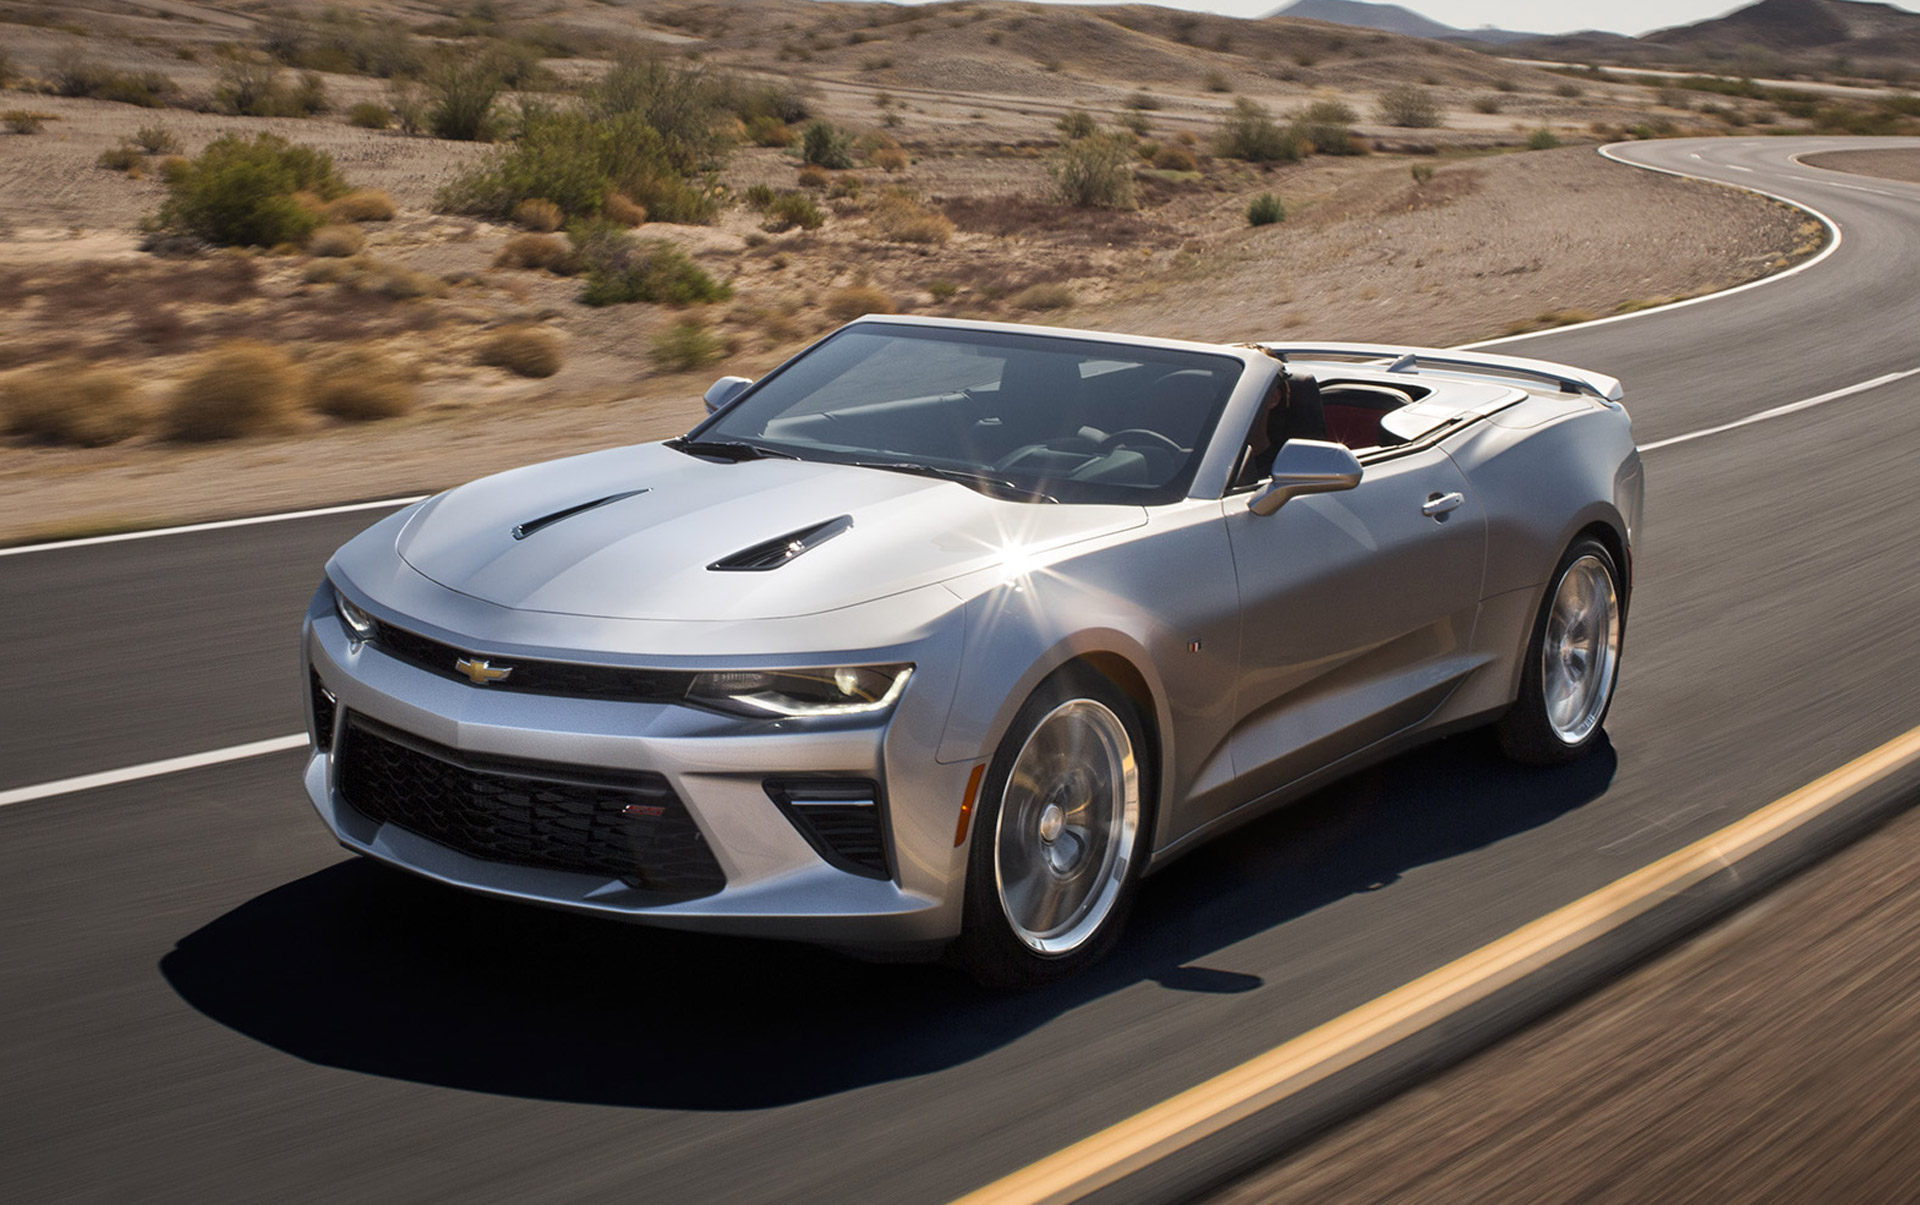 2016 Chevrolet Camaro Convertible Priced From $33,695